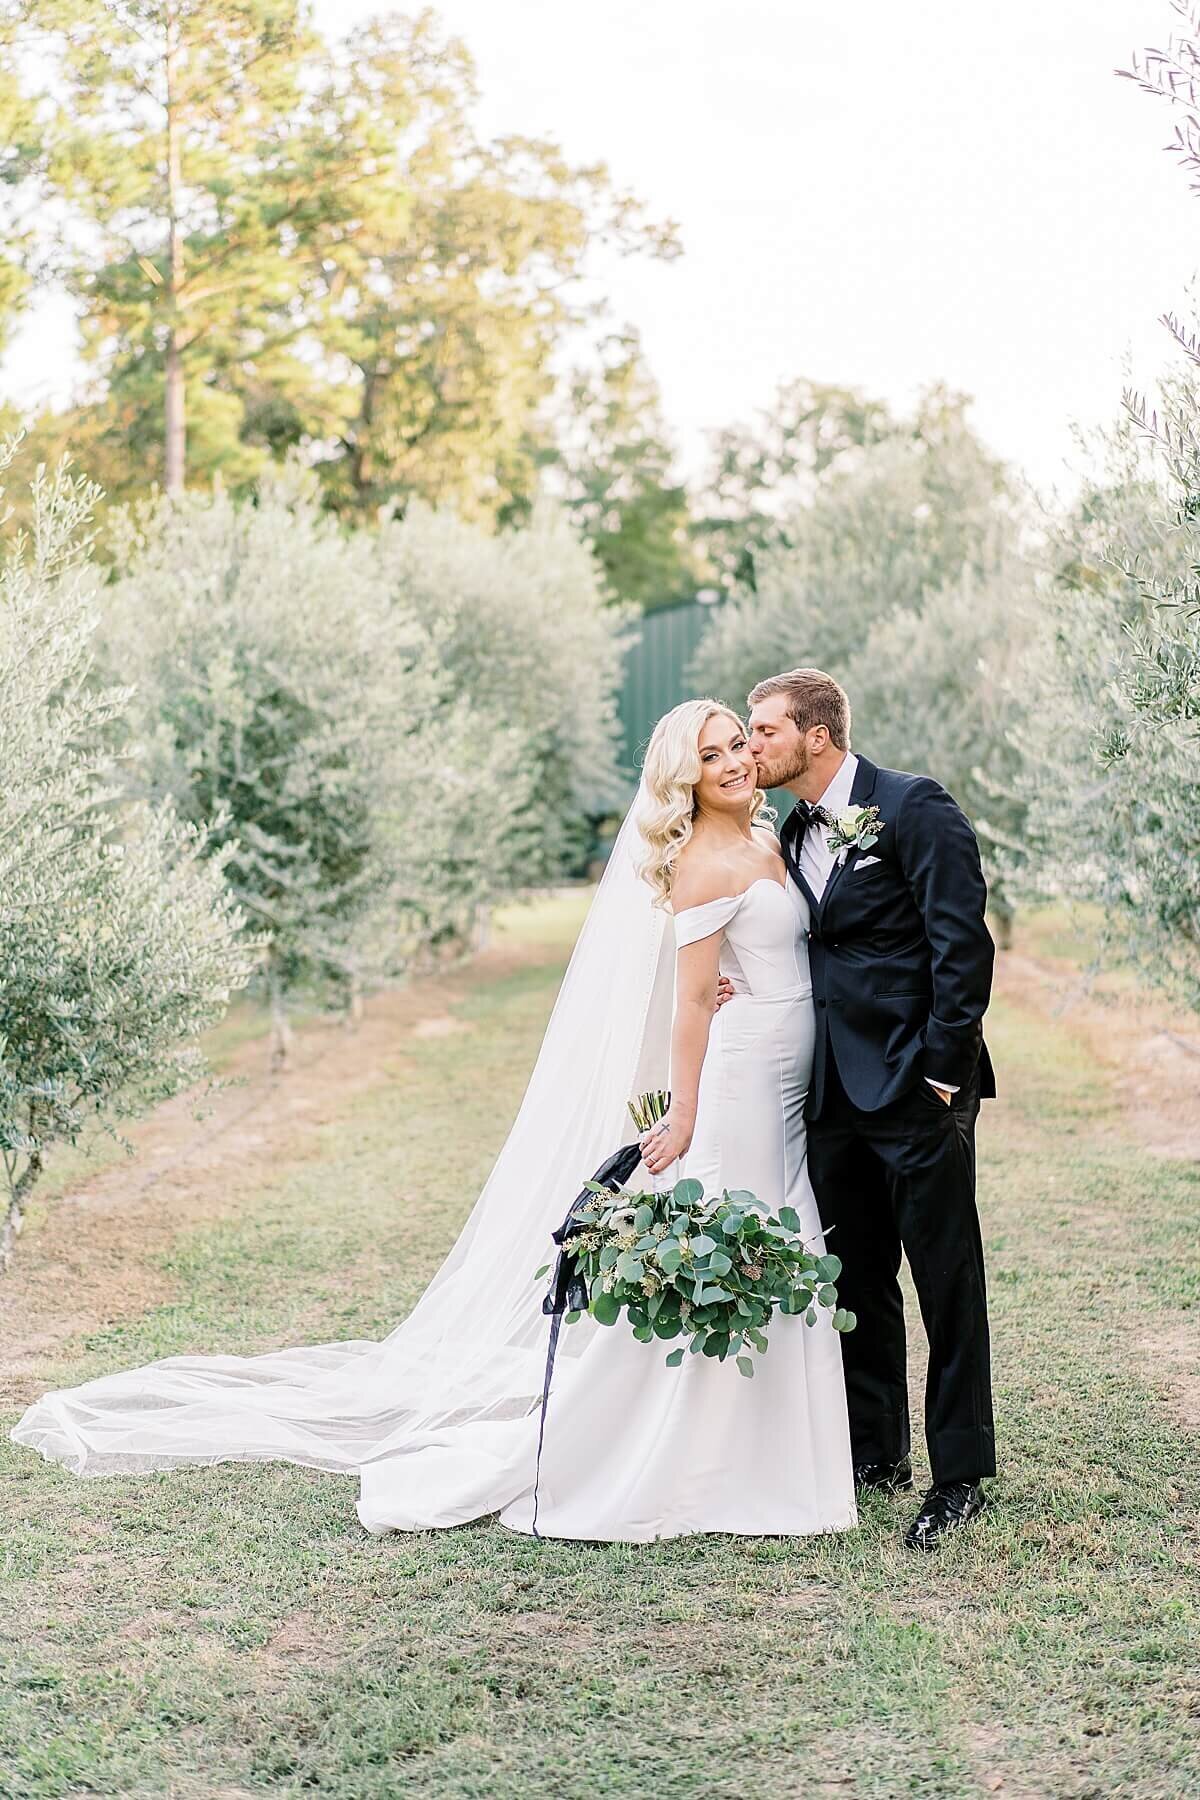 Bride and Groom Portraits in the Olive Grove at Annex Wedding Venue photography by Alicia Yarrish Photography